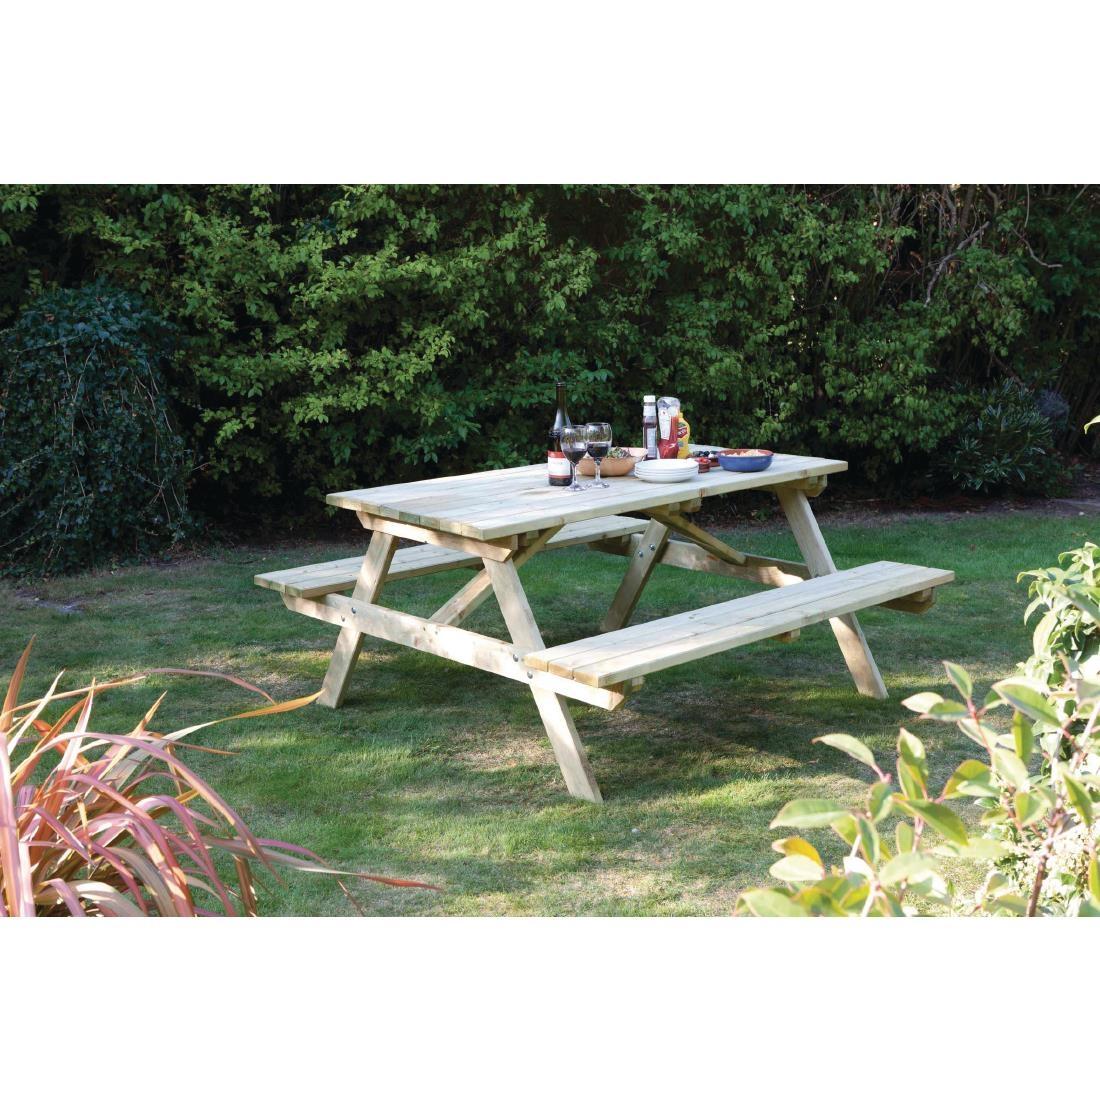 Rowlinson Wooden Picnic Bench 5ft - CG095  - 4